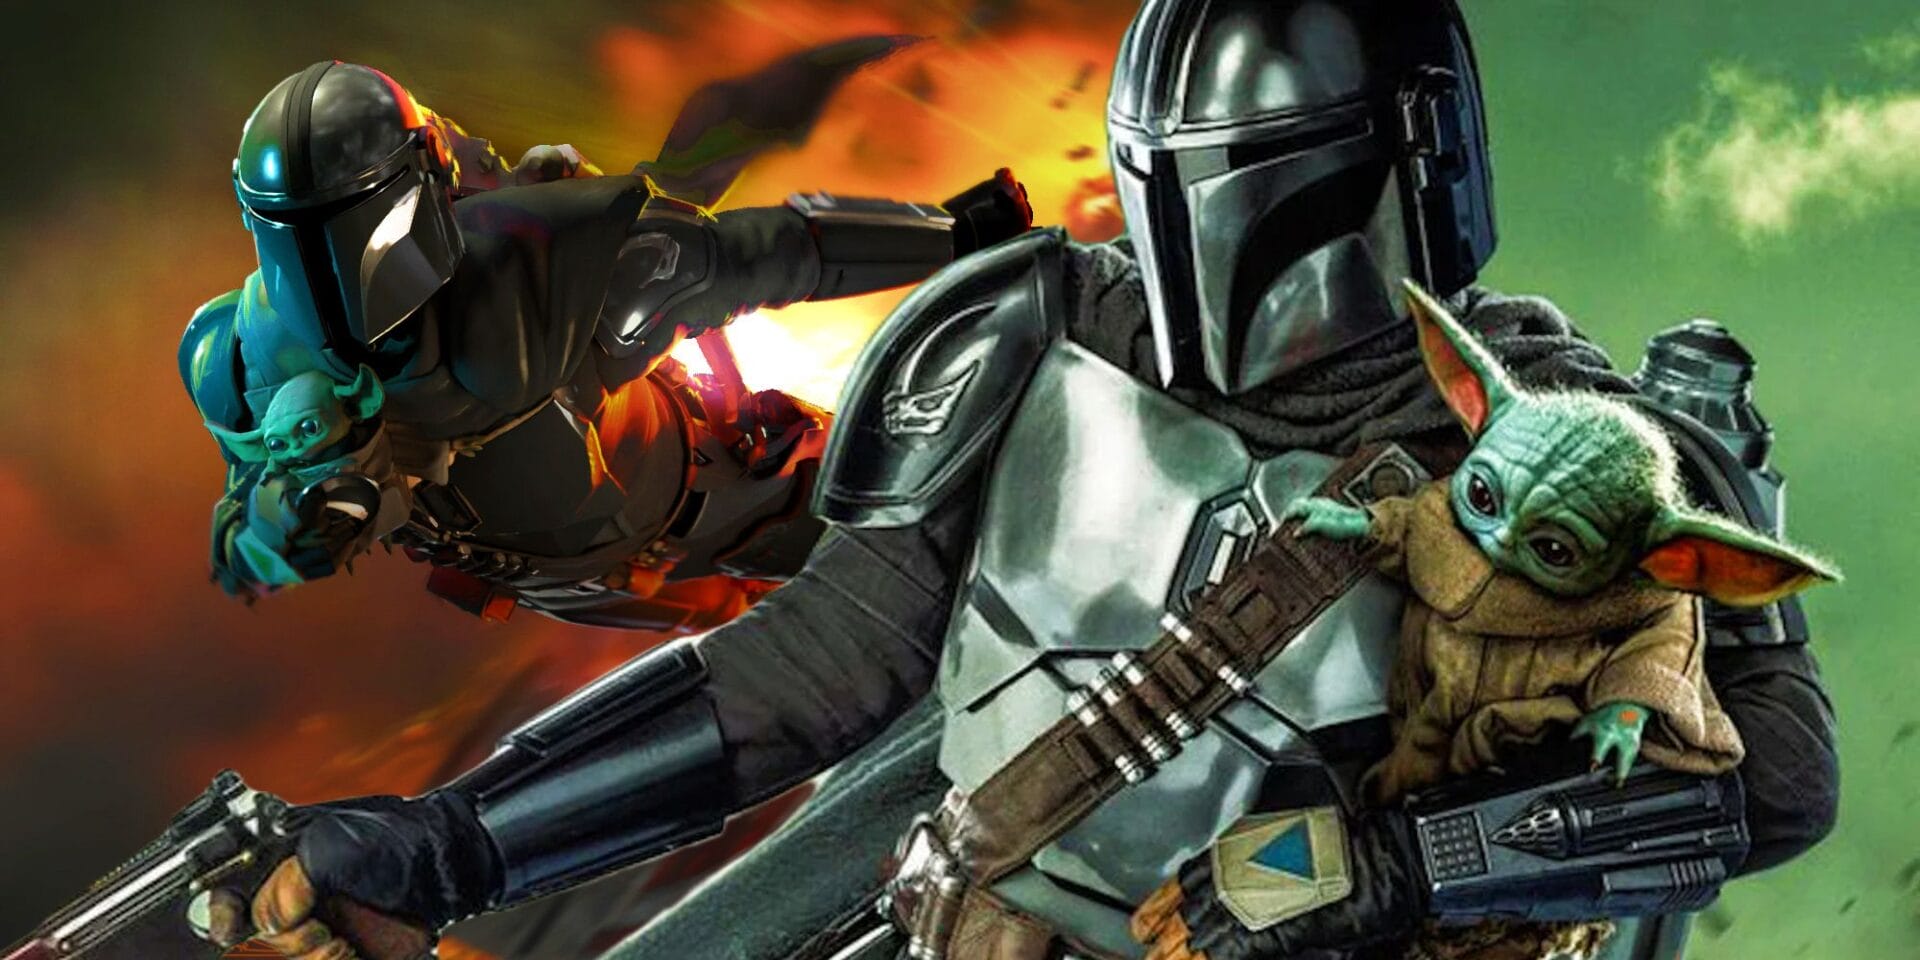 Lucasfilm Boss Kathleen Kennedy Remembers The Best Moments Of Her Career, Hints At Imminent Mandalorian Movie News